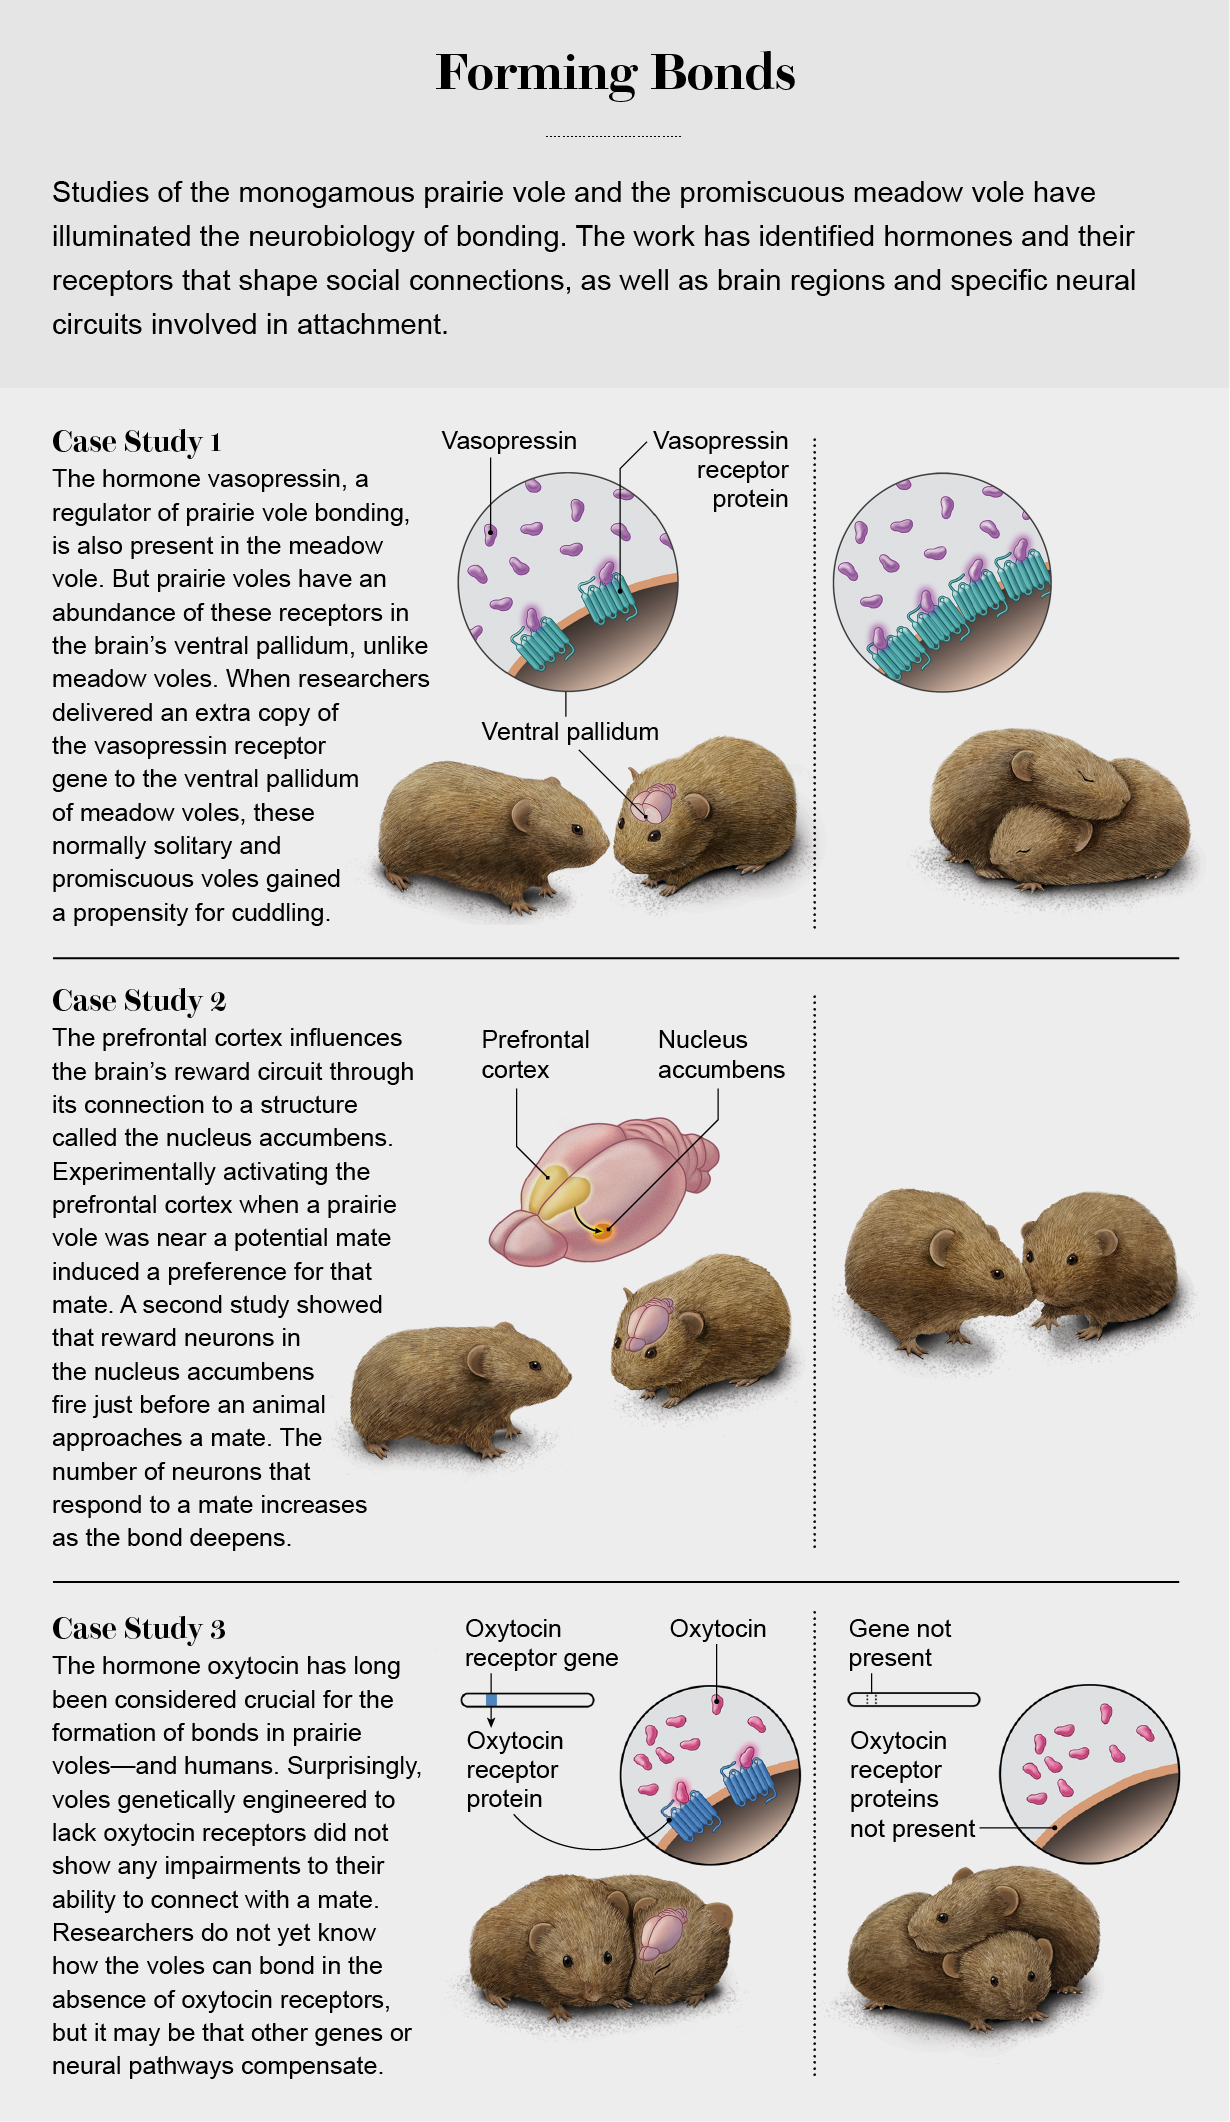 Graphic highlights case studies showing that increasing vasopressin receptors and stimulating reward neurons in the nucleus accumbens both promote bonding in voles, whereas eliminating oxytocin receptors does not affect bonding.